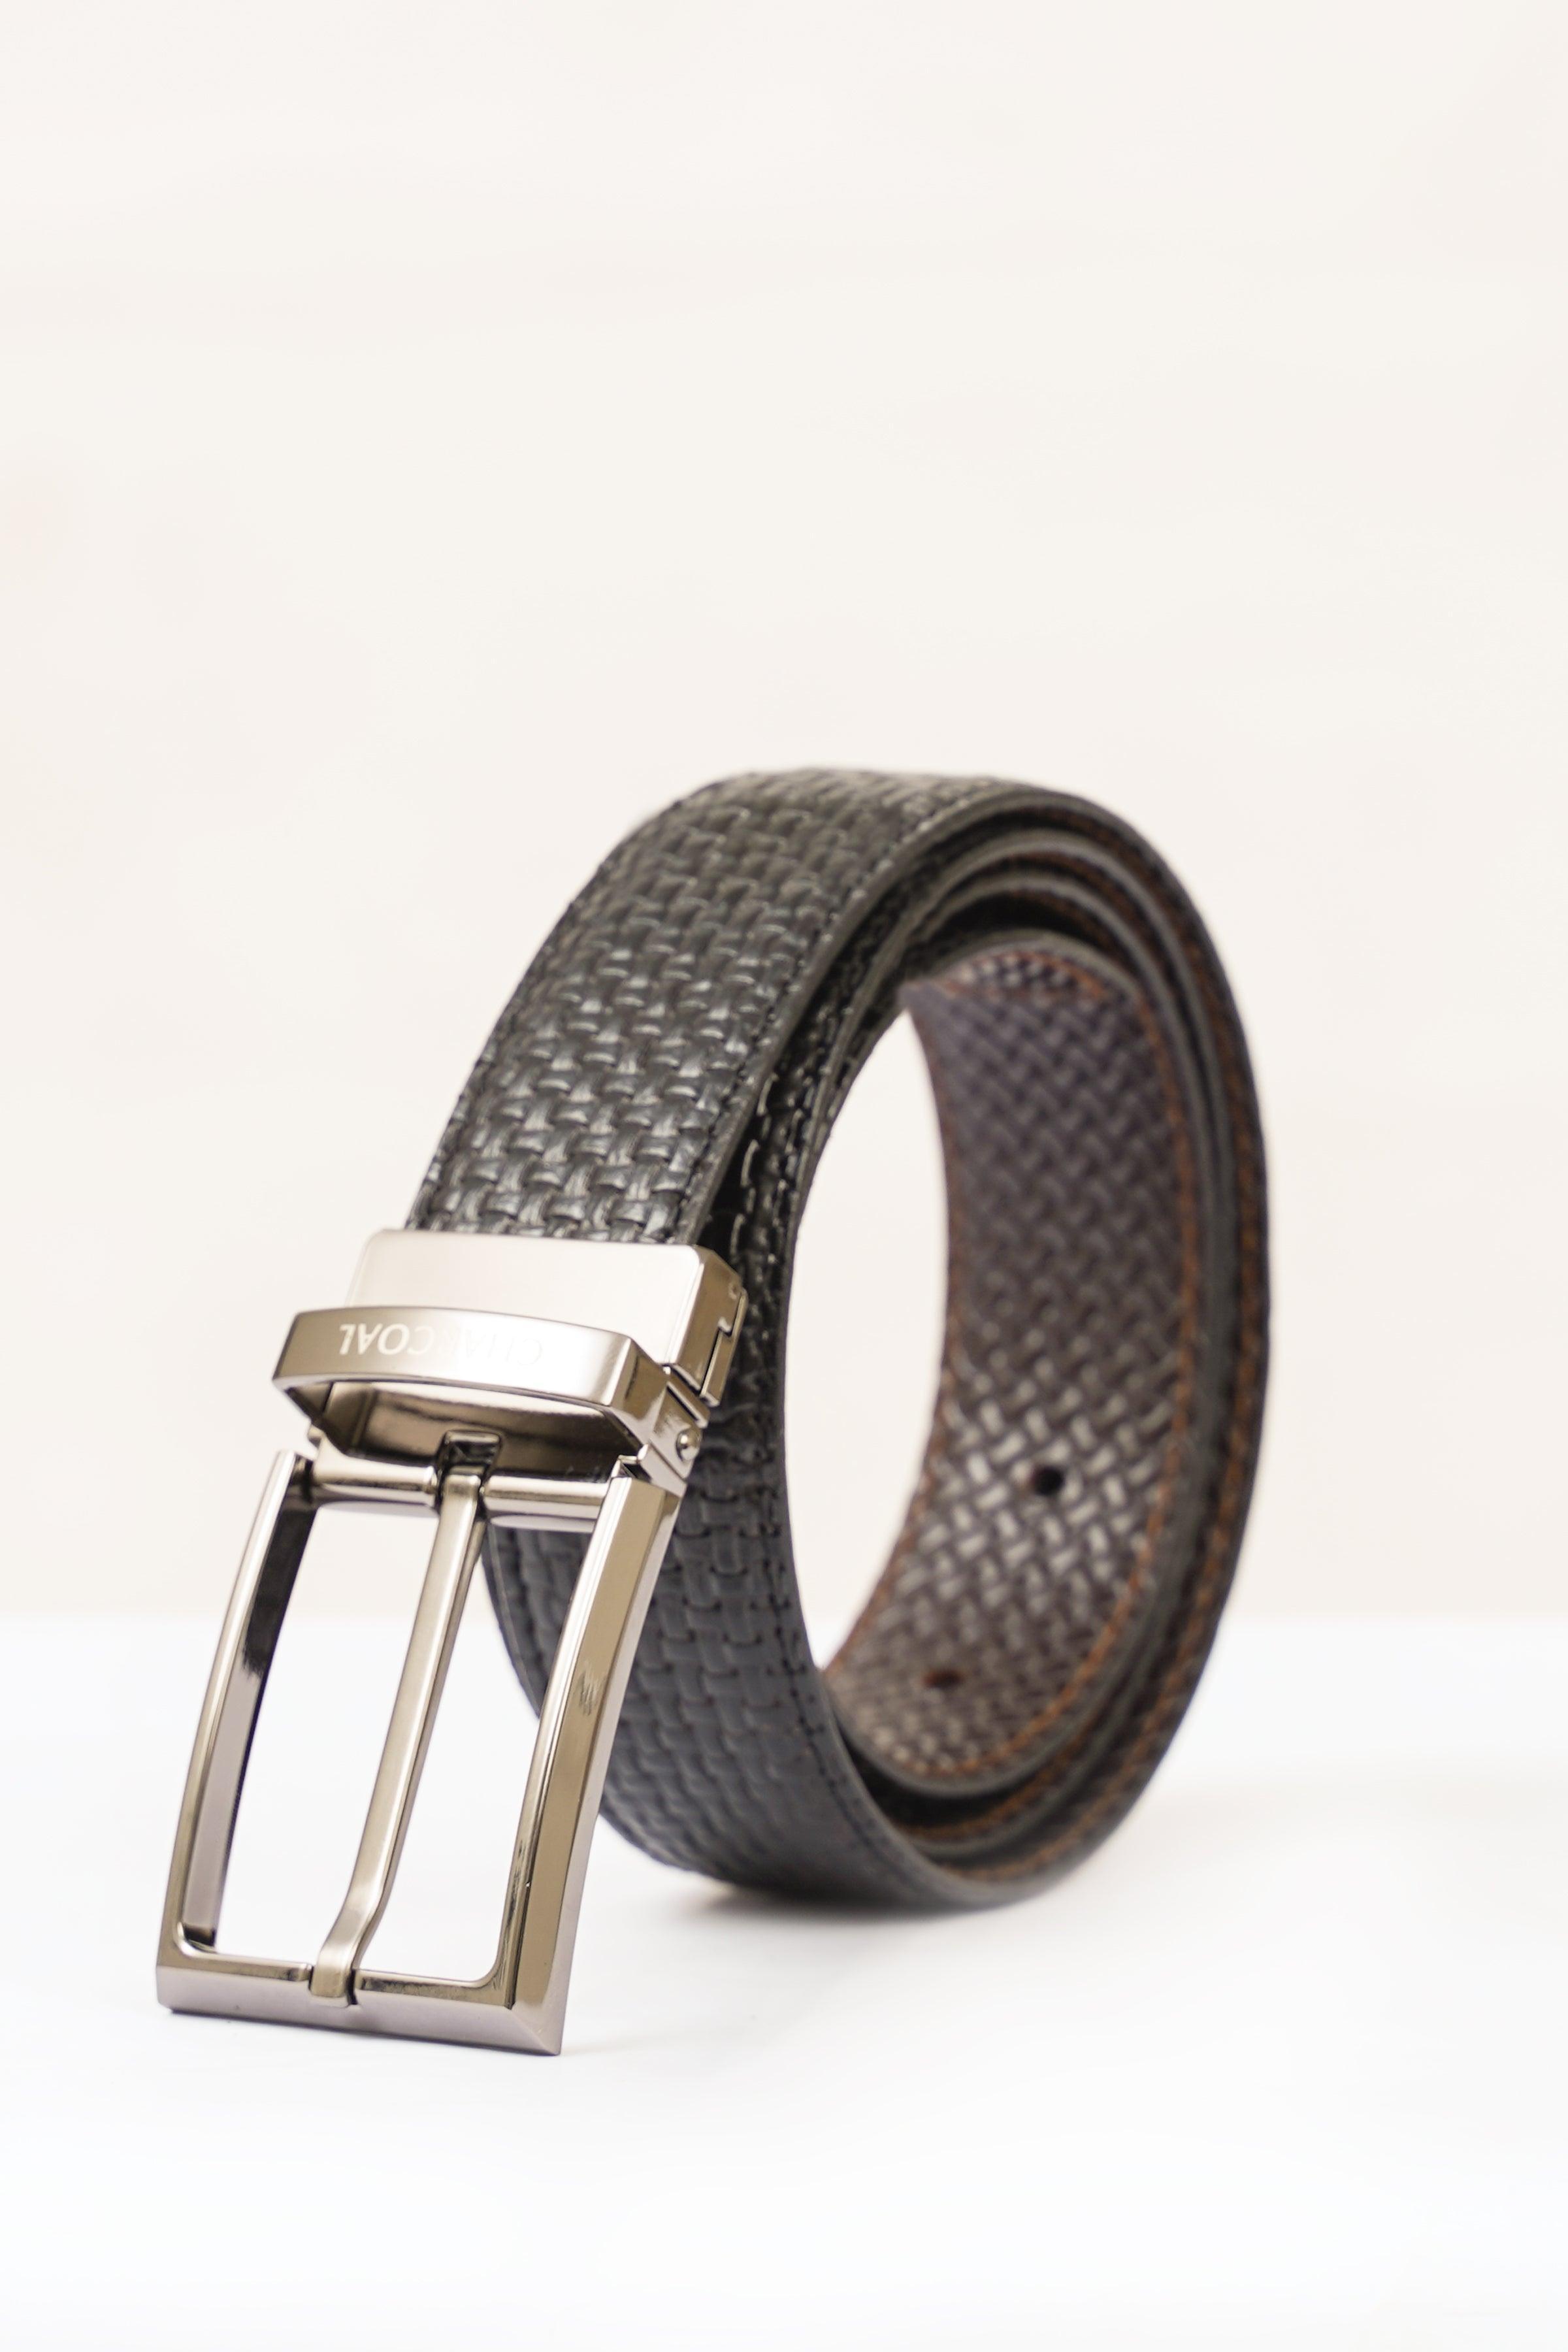 REVERSIBLE BELT at Charcoal Clothing